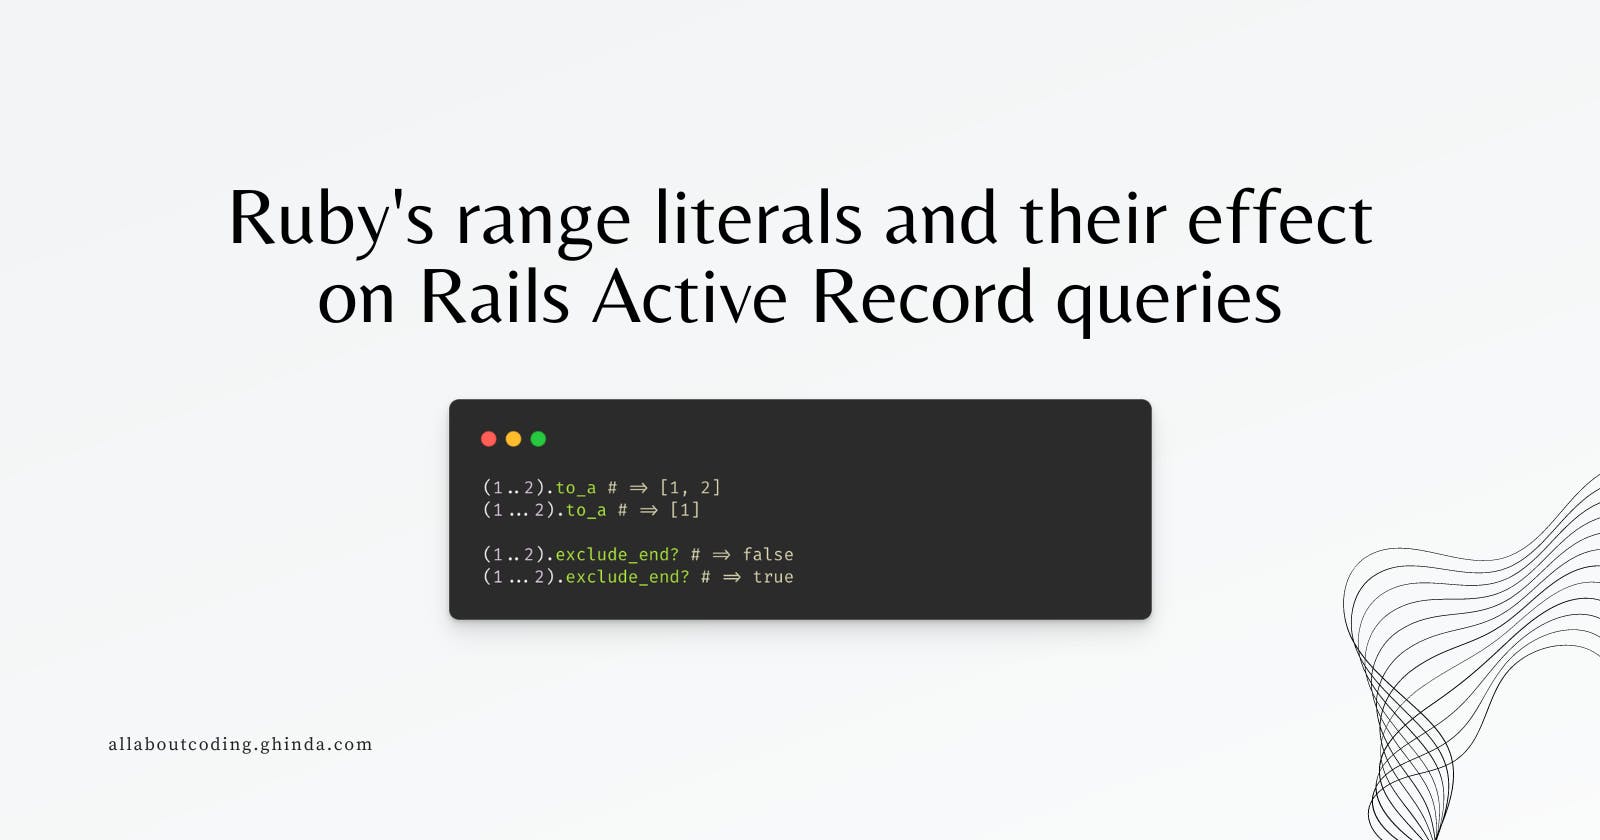 Ruby's range literals and their effect on Rails Active Record queries